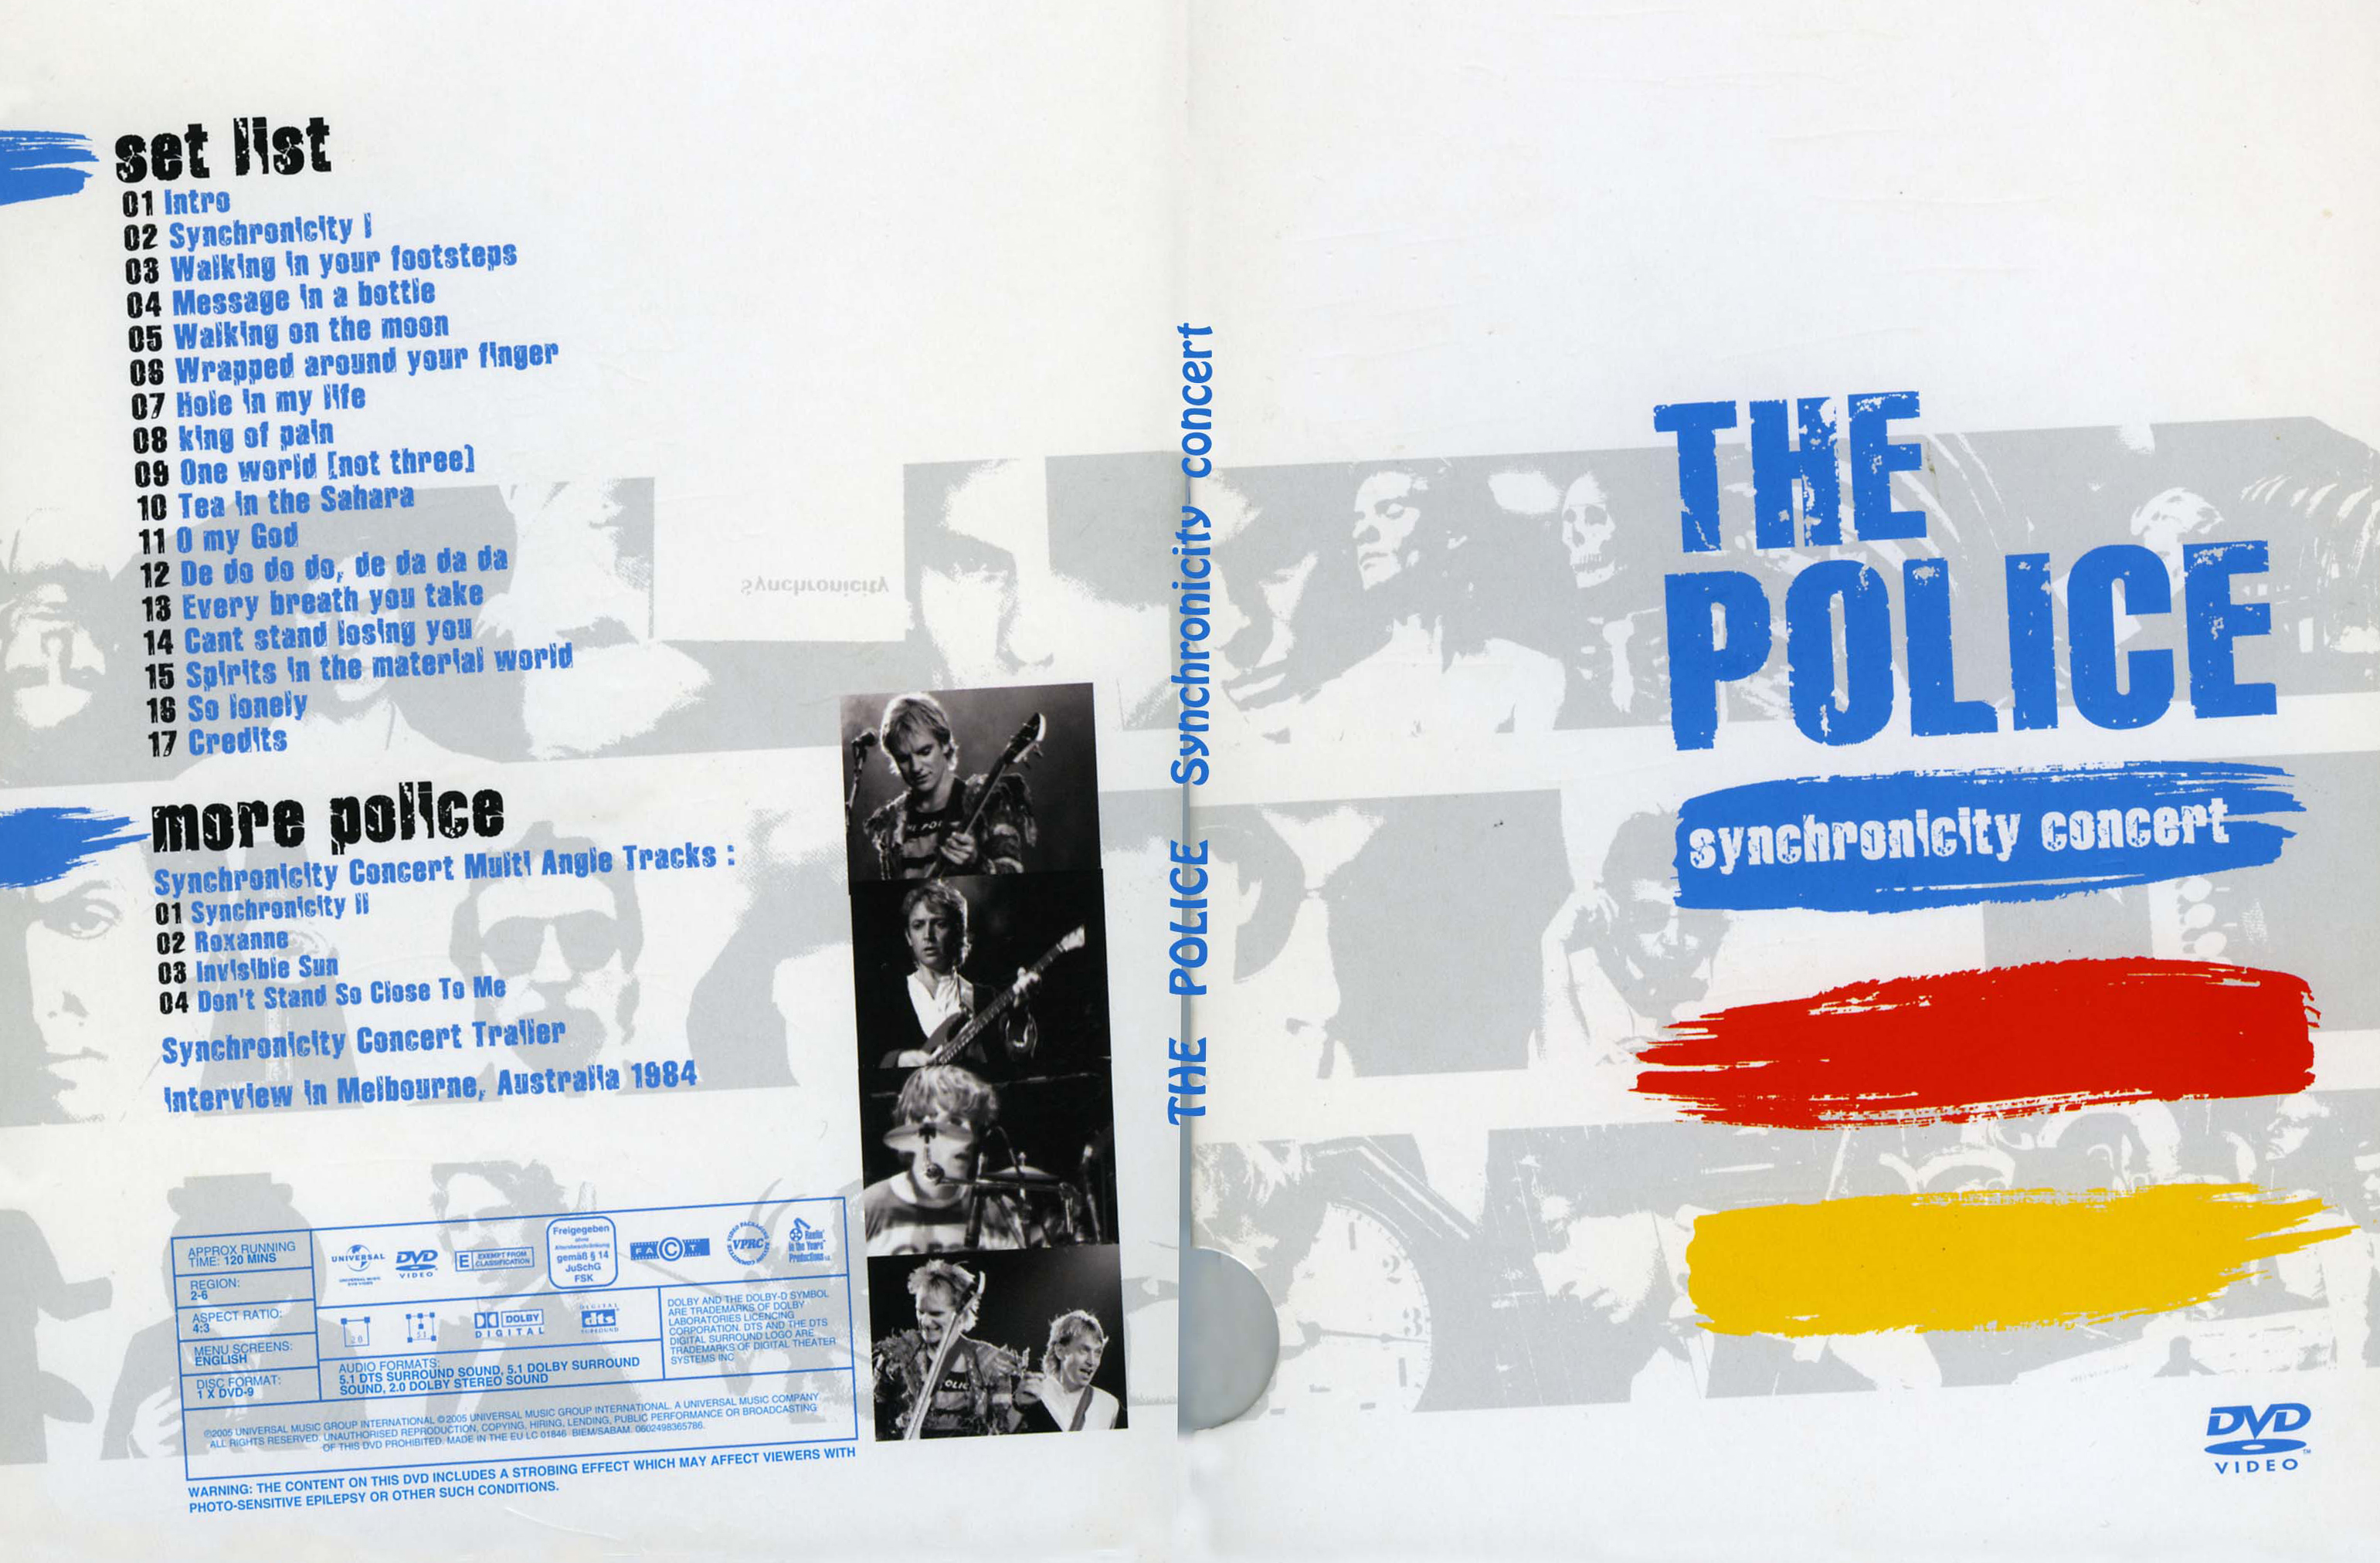 Jaquette DVD The police synchronicity concert